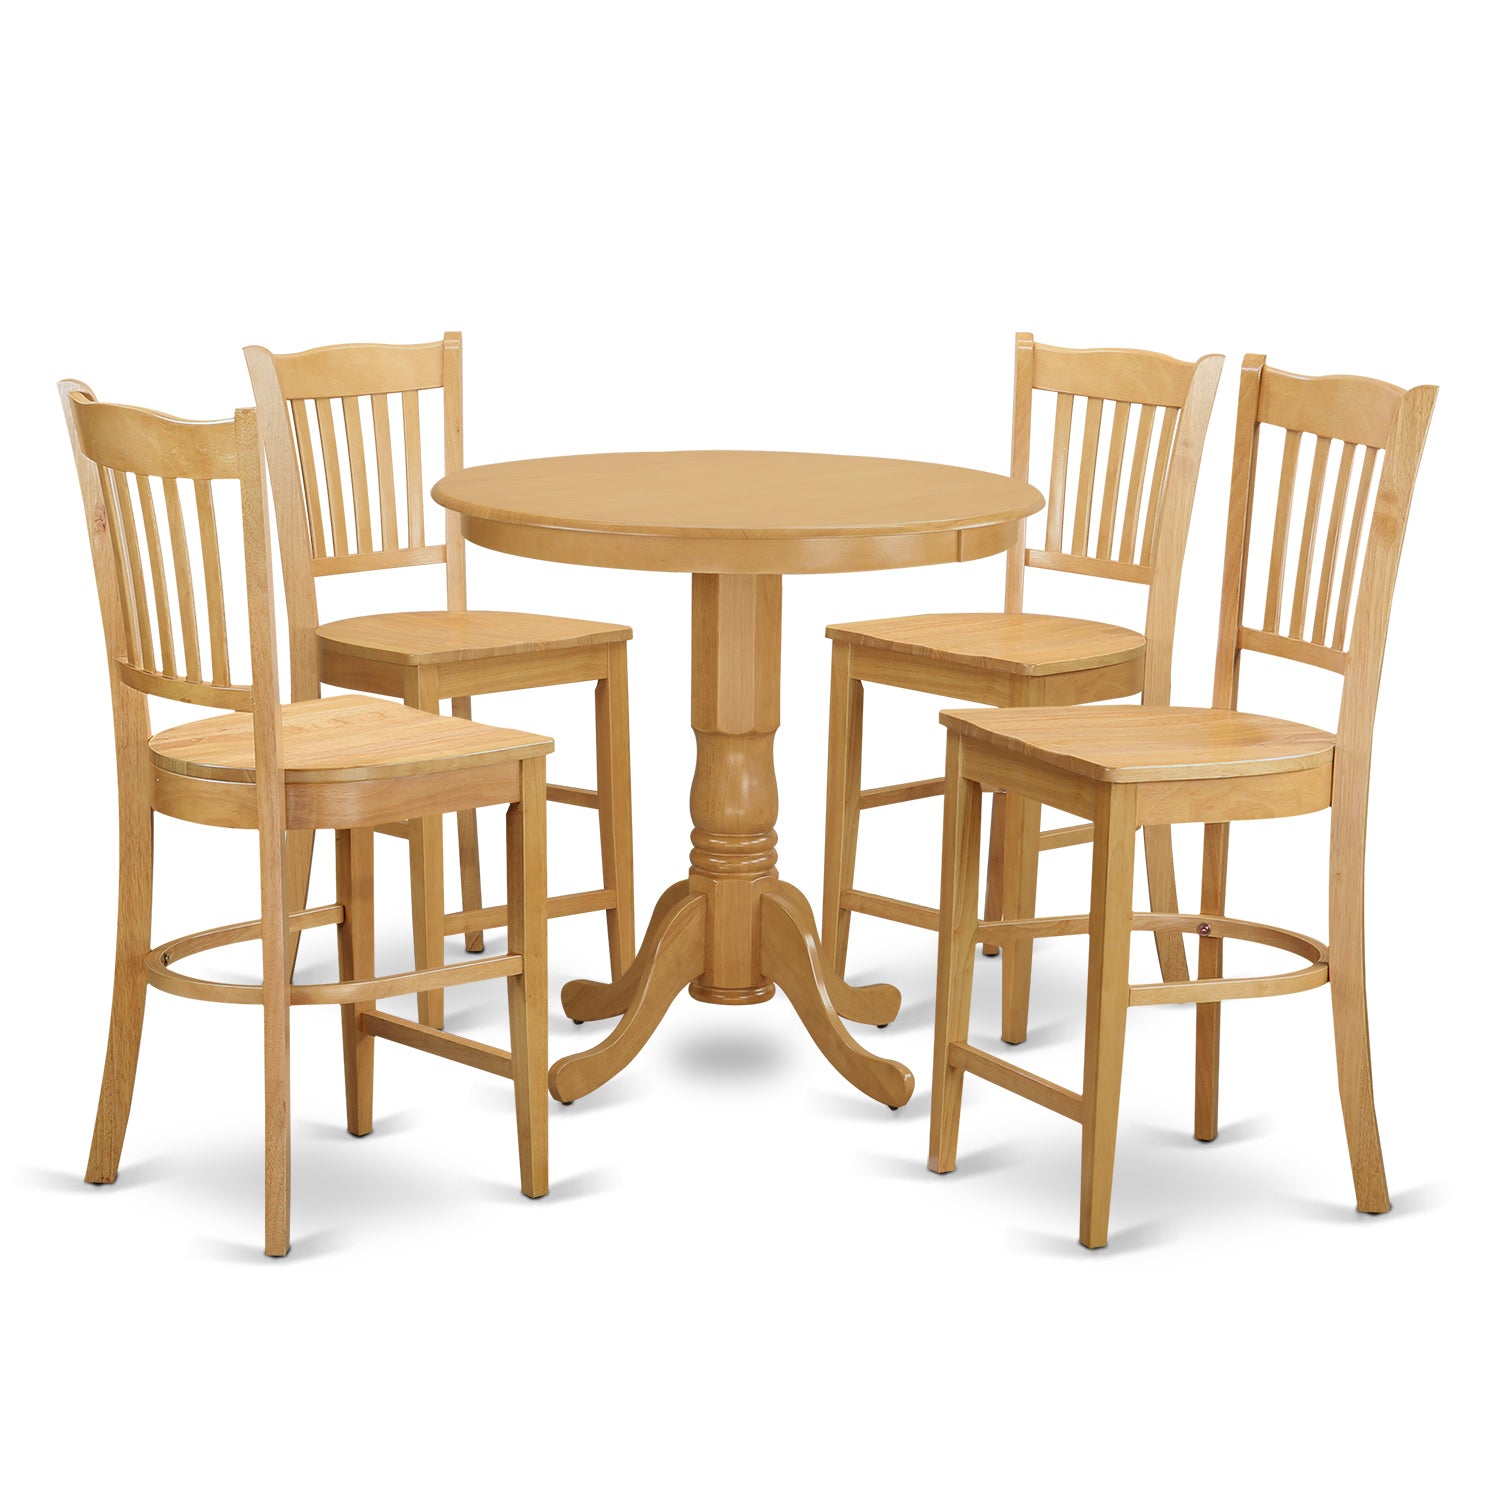 JAGR5-OAK-W 5 PC counter height pub set - Kitchen Table and 4 bar stools.